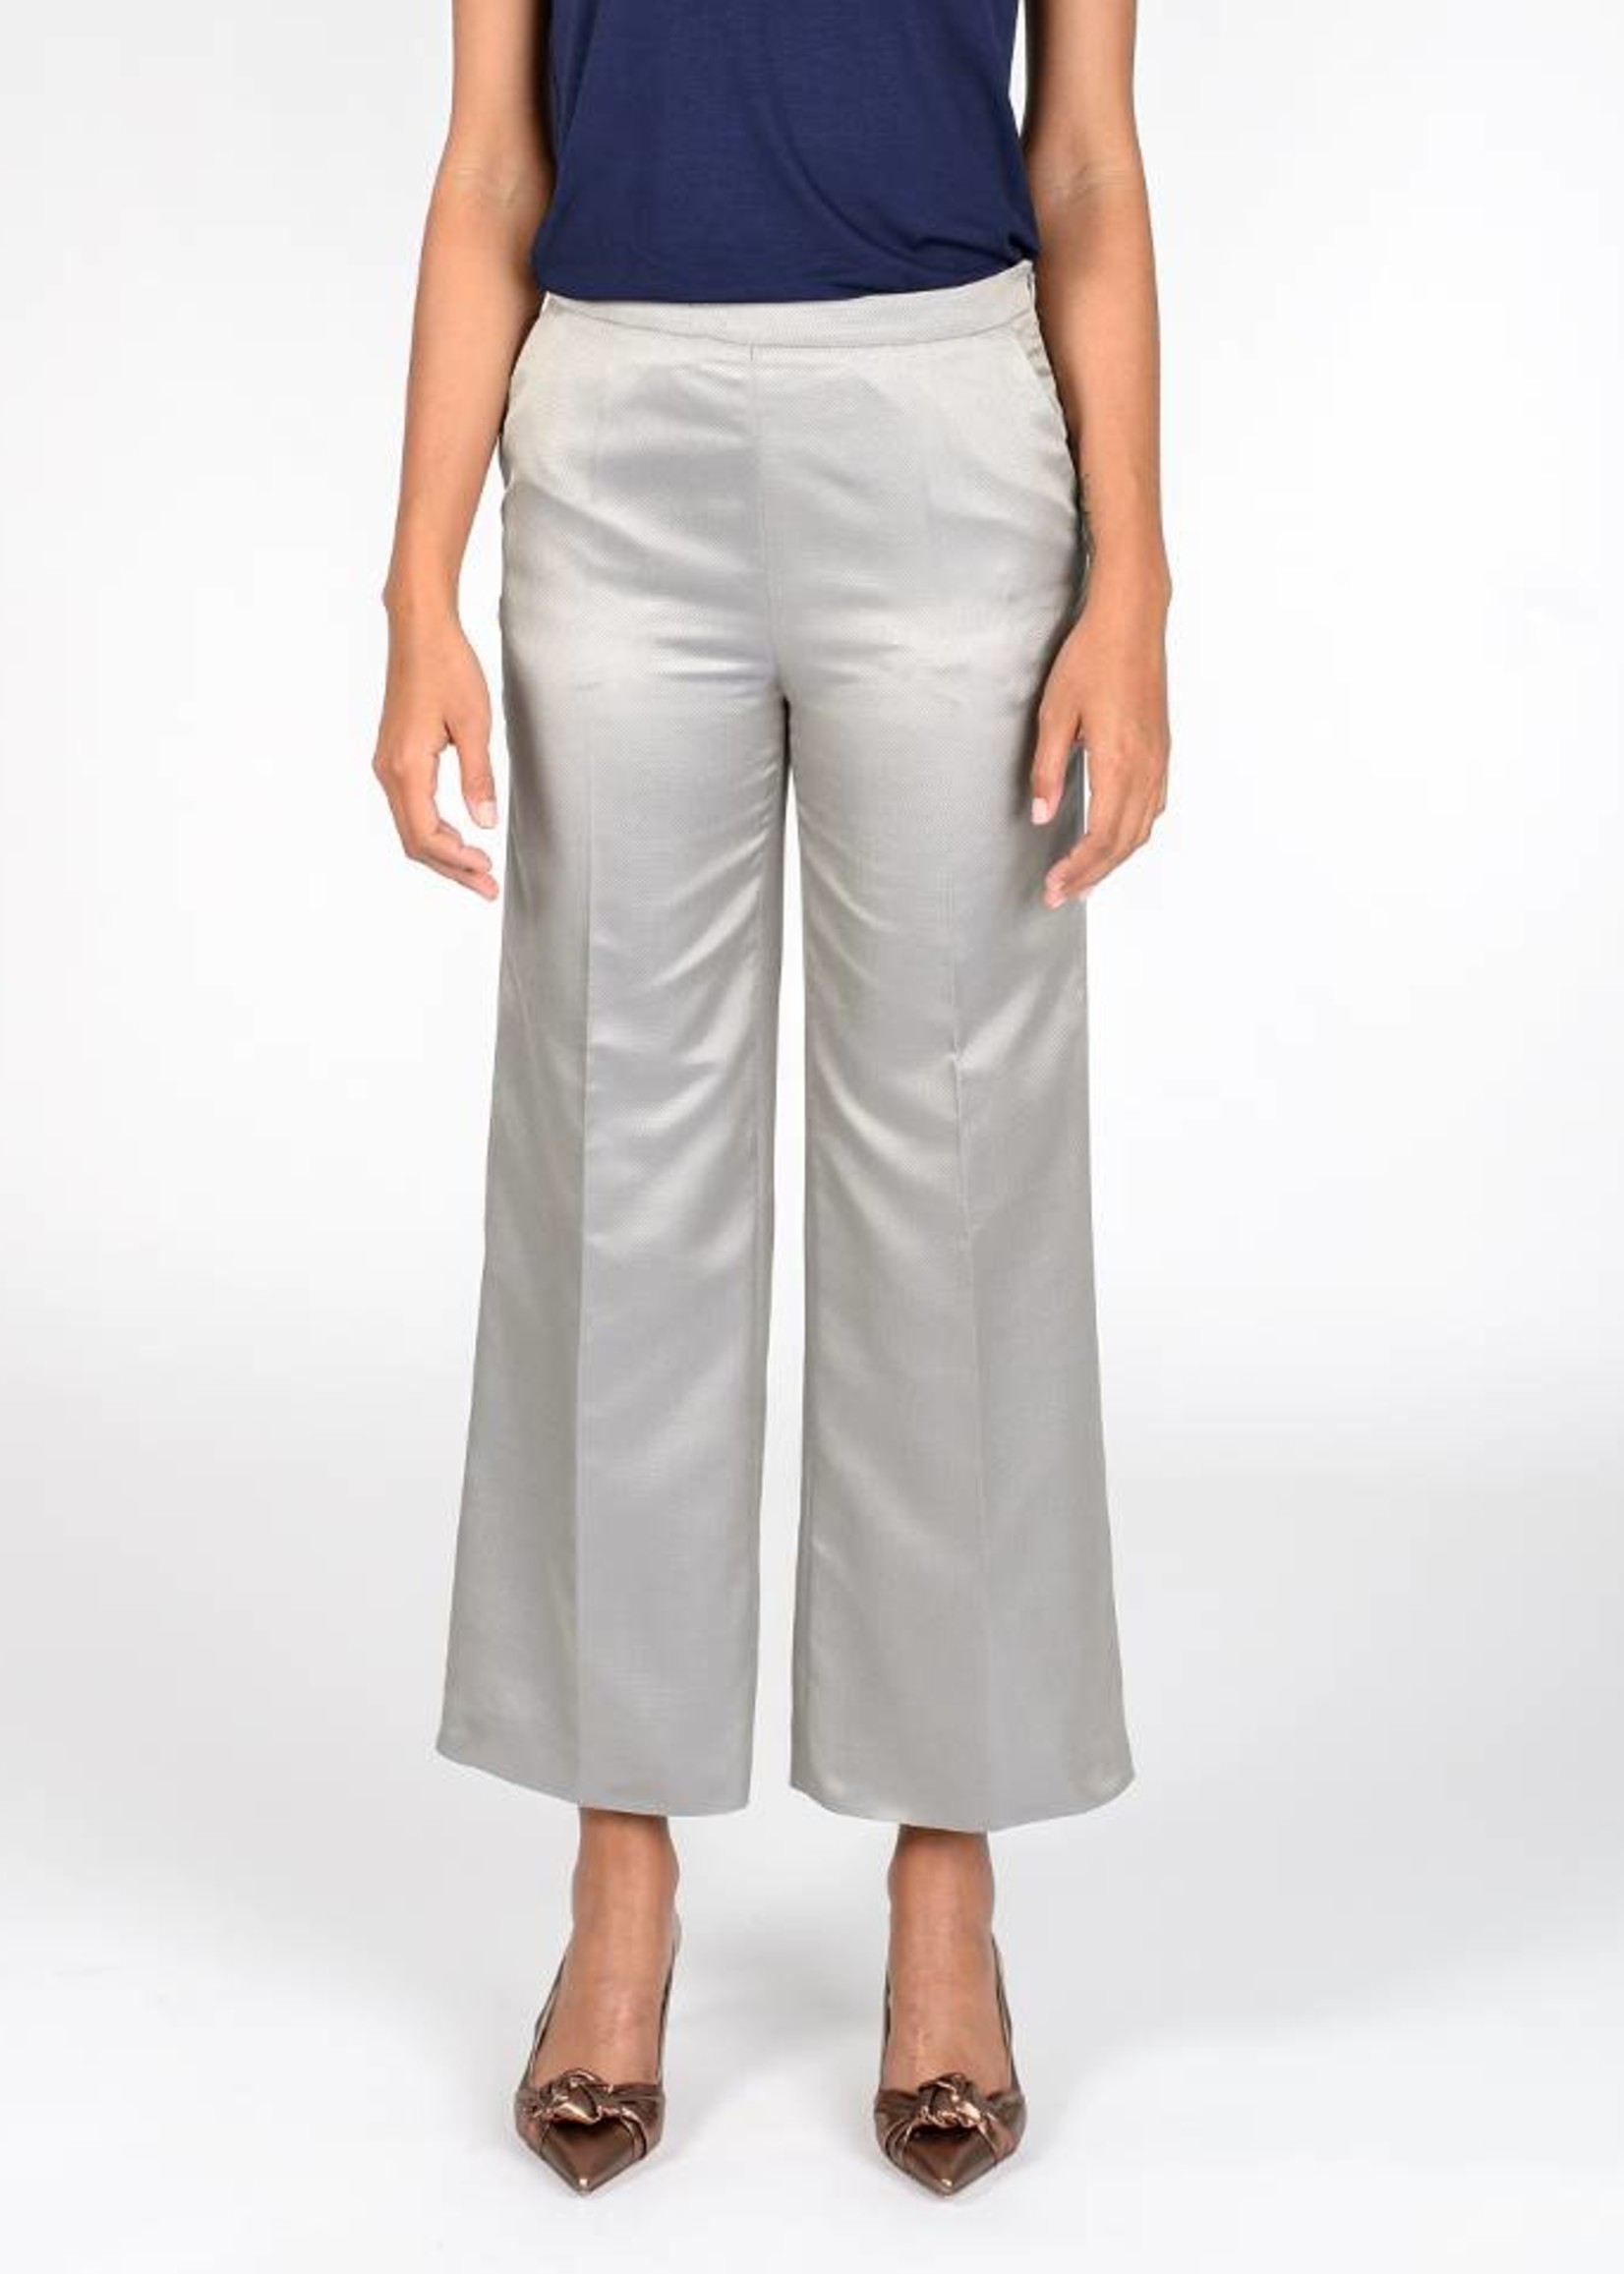 7/8 length cropped pants